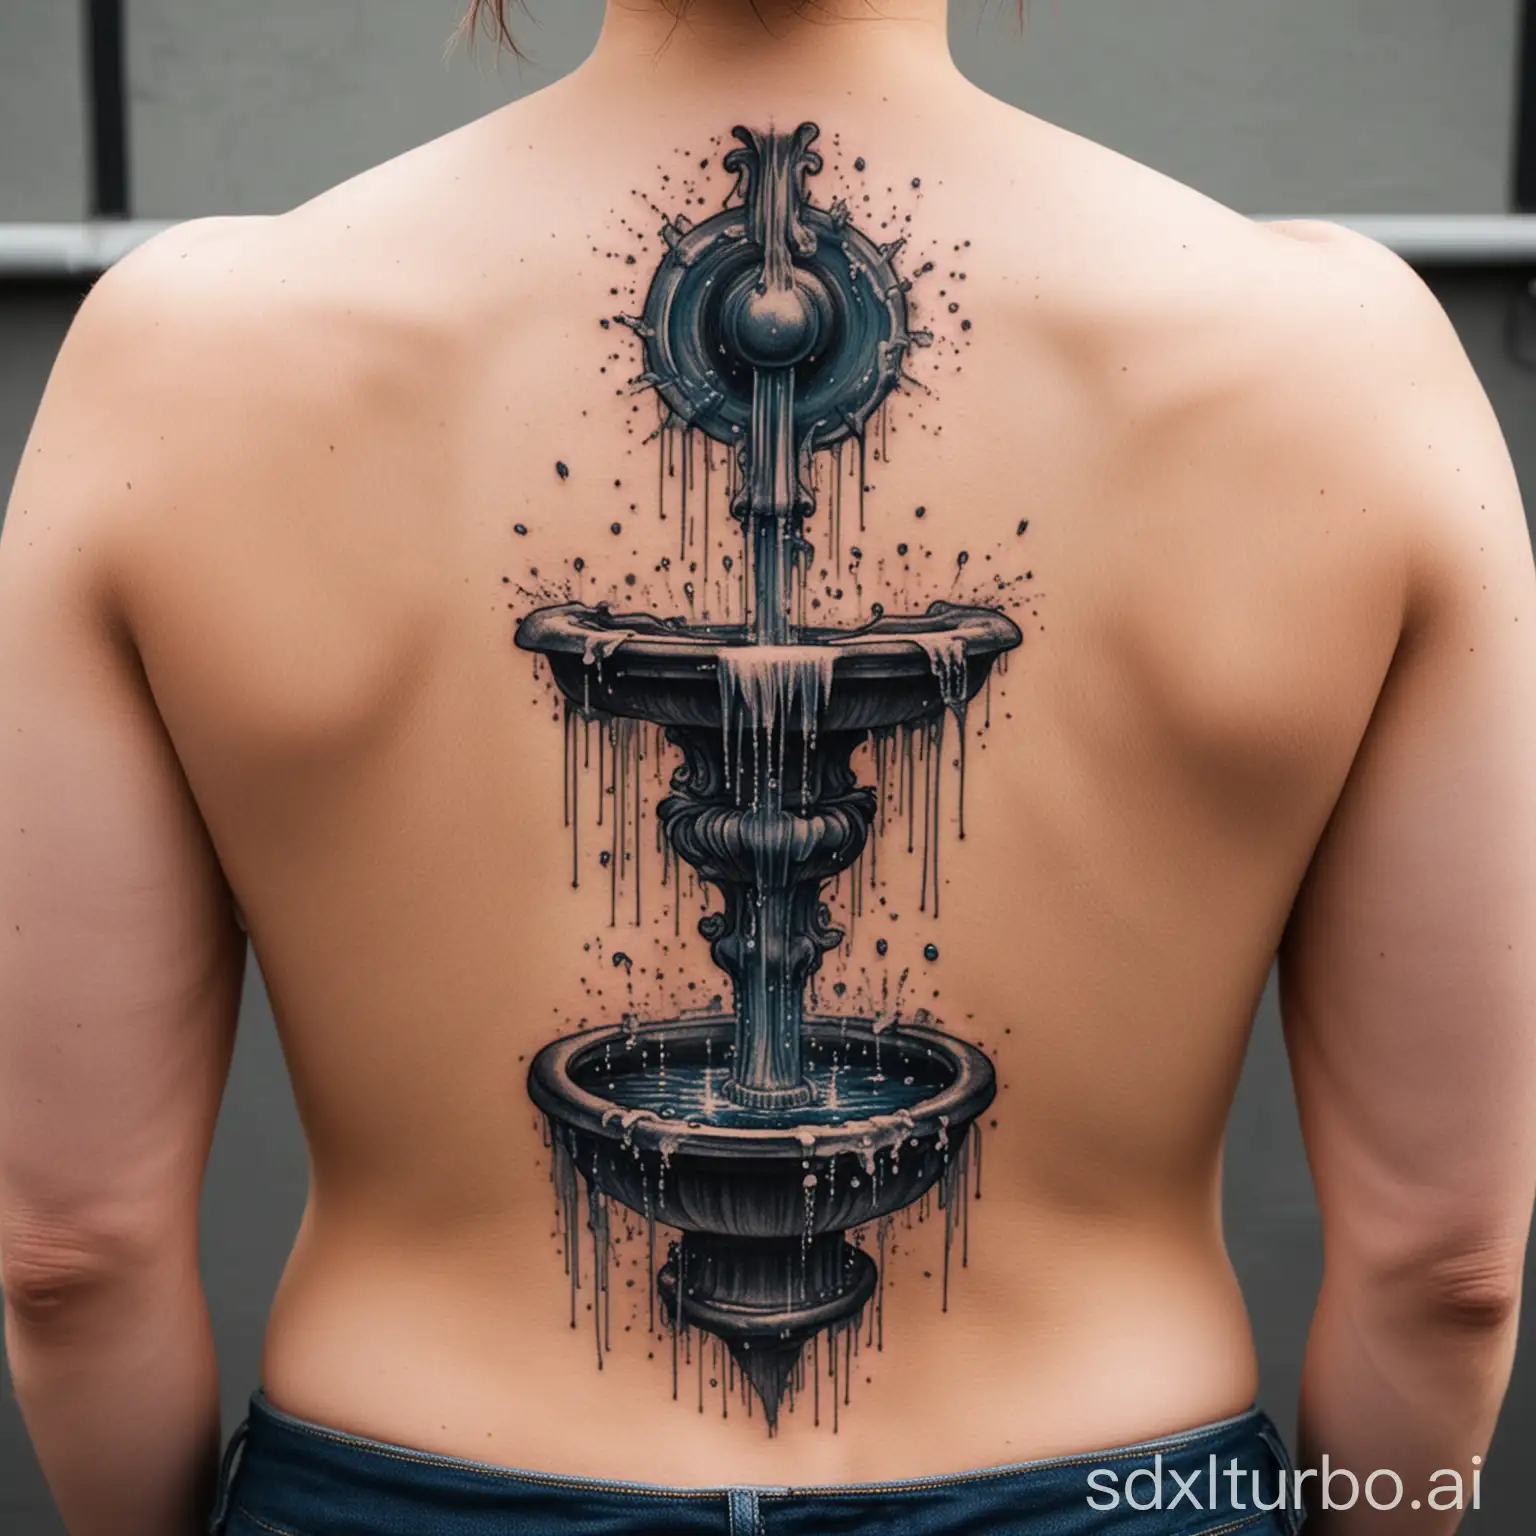 a persons backside with a water fountain tattoo